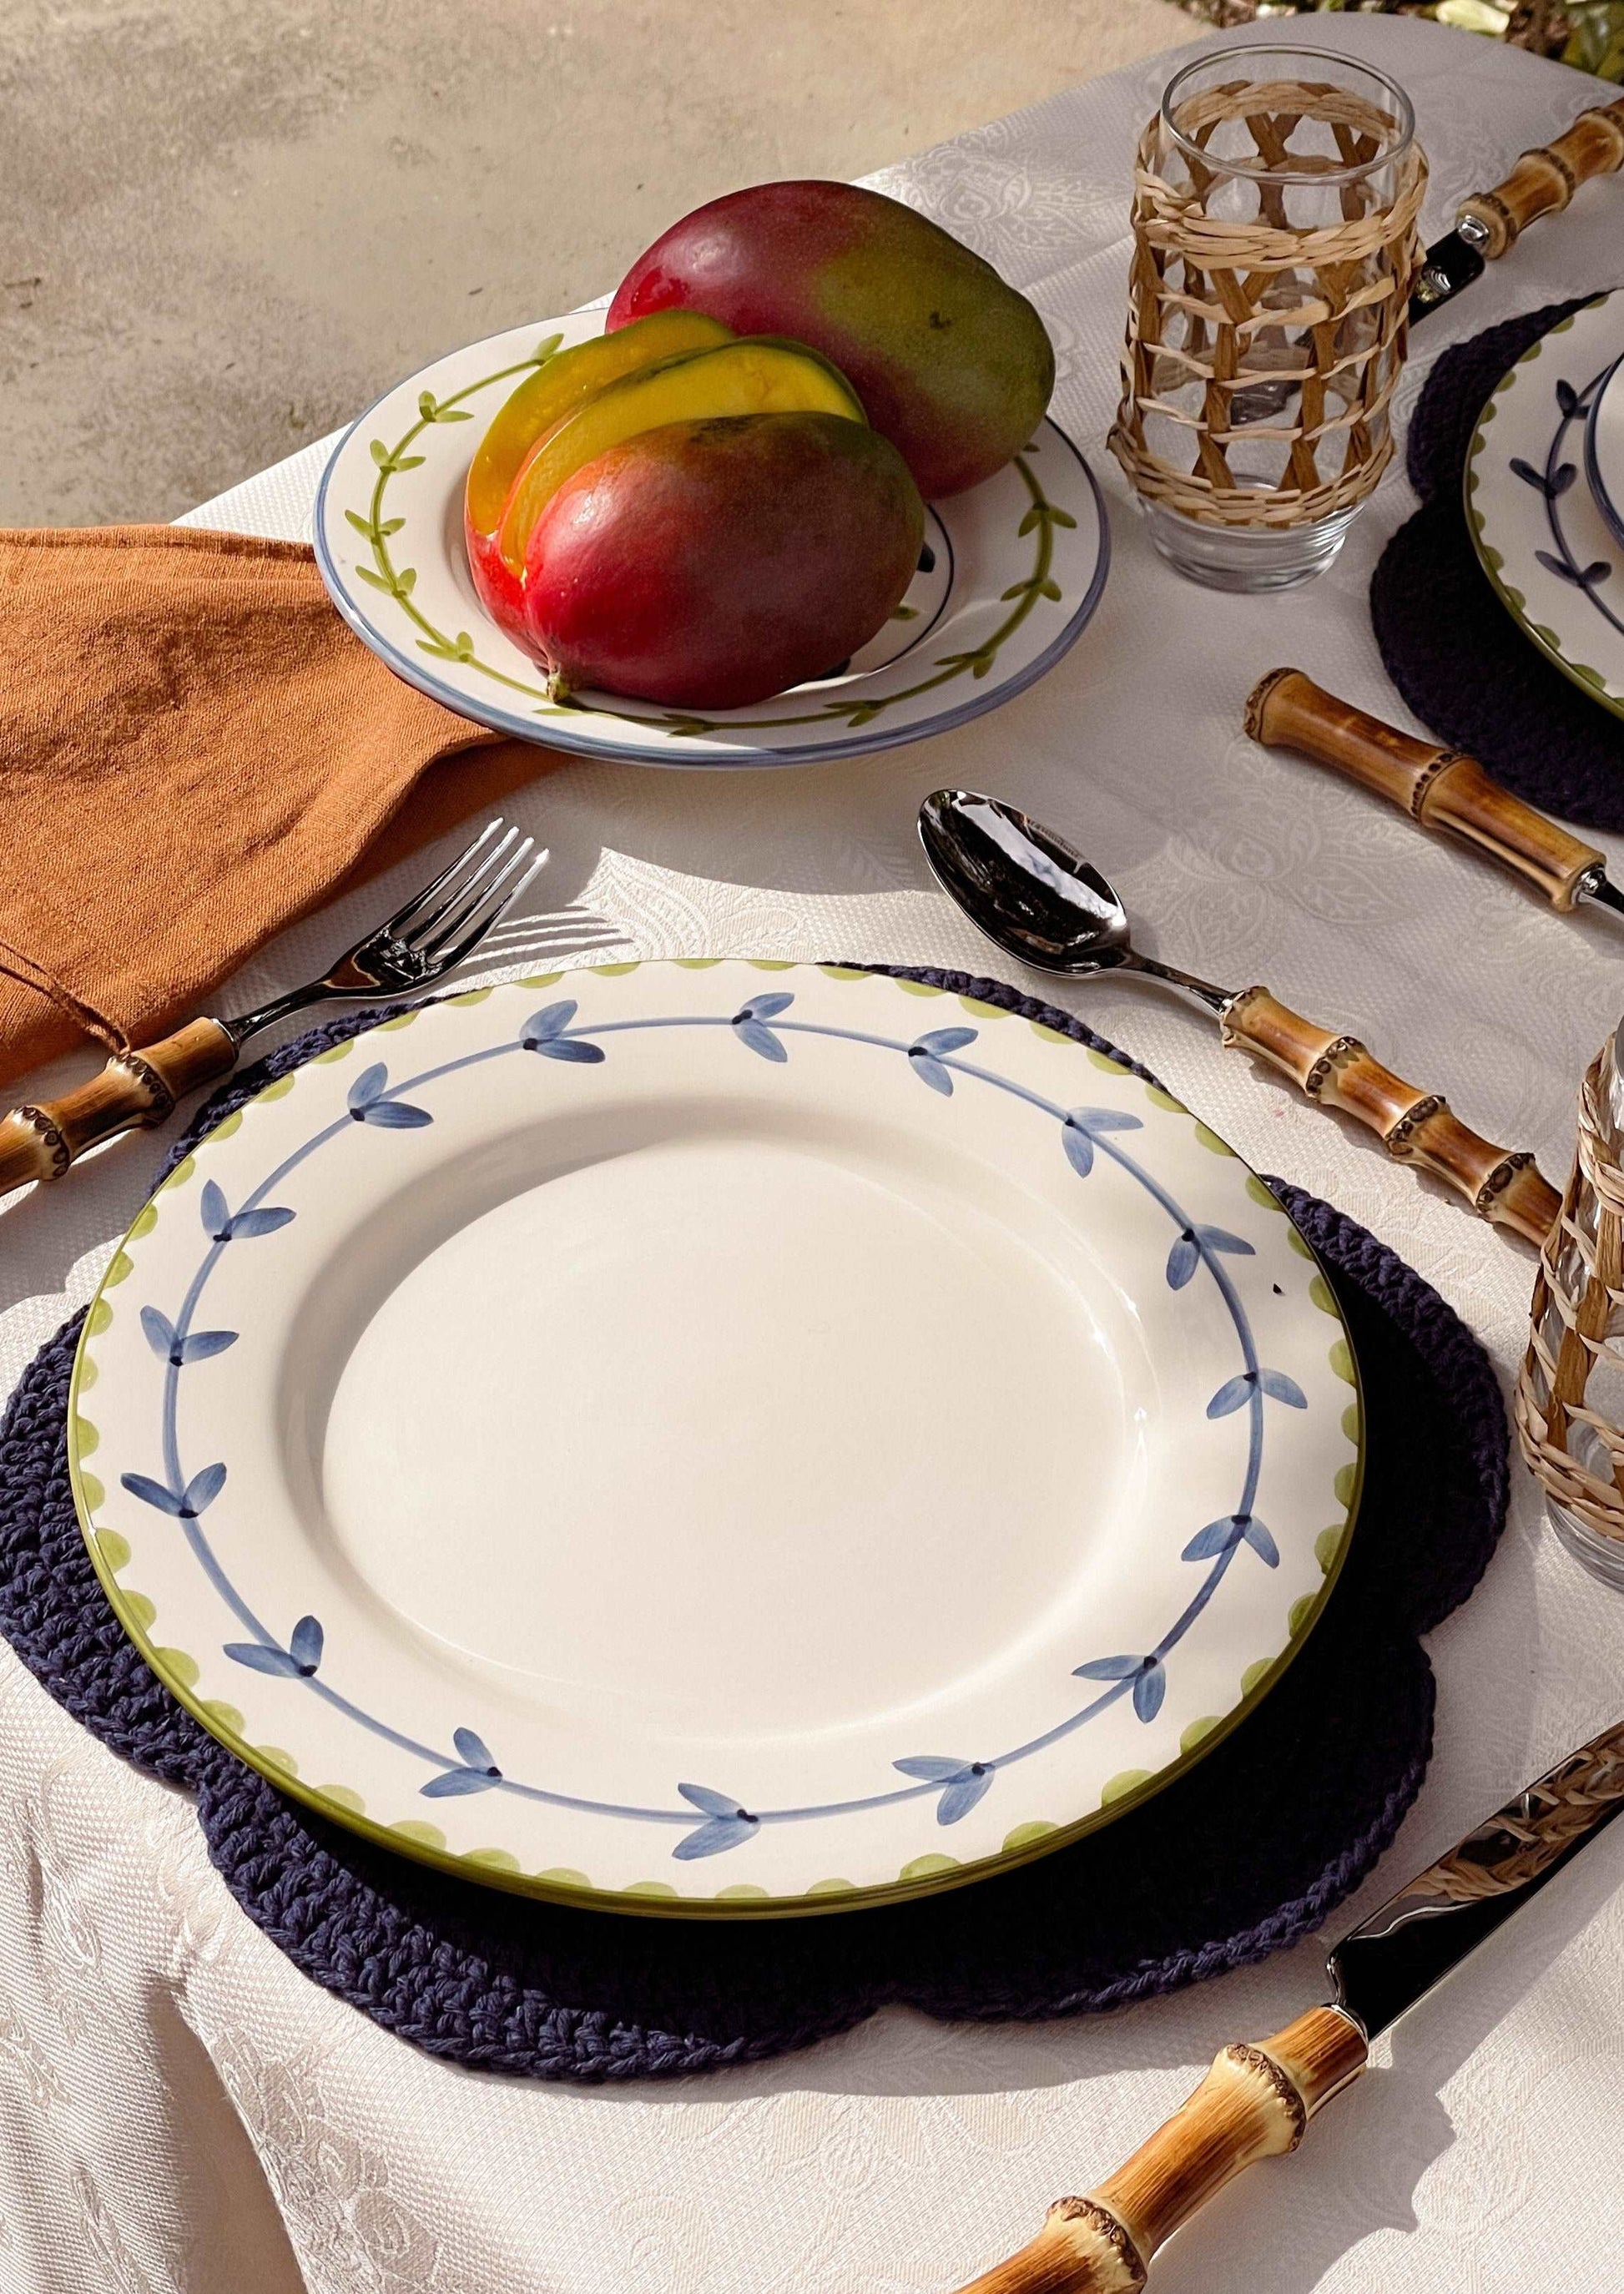 Banana Hand-Painted Dinner Plate - On the Table - Matching Bamboo Cutlery